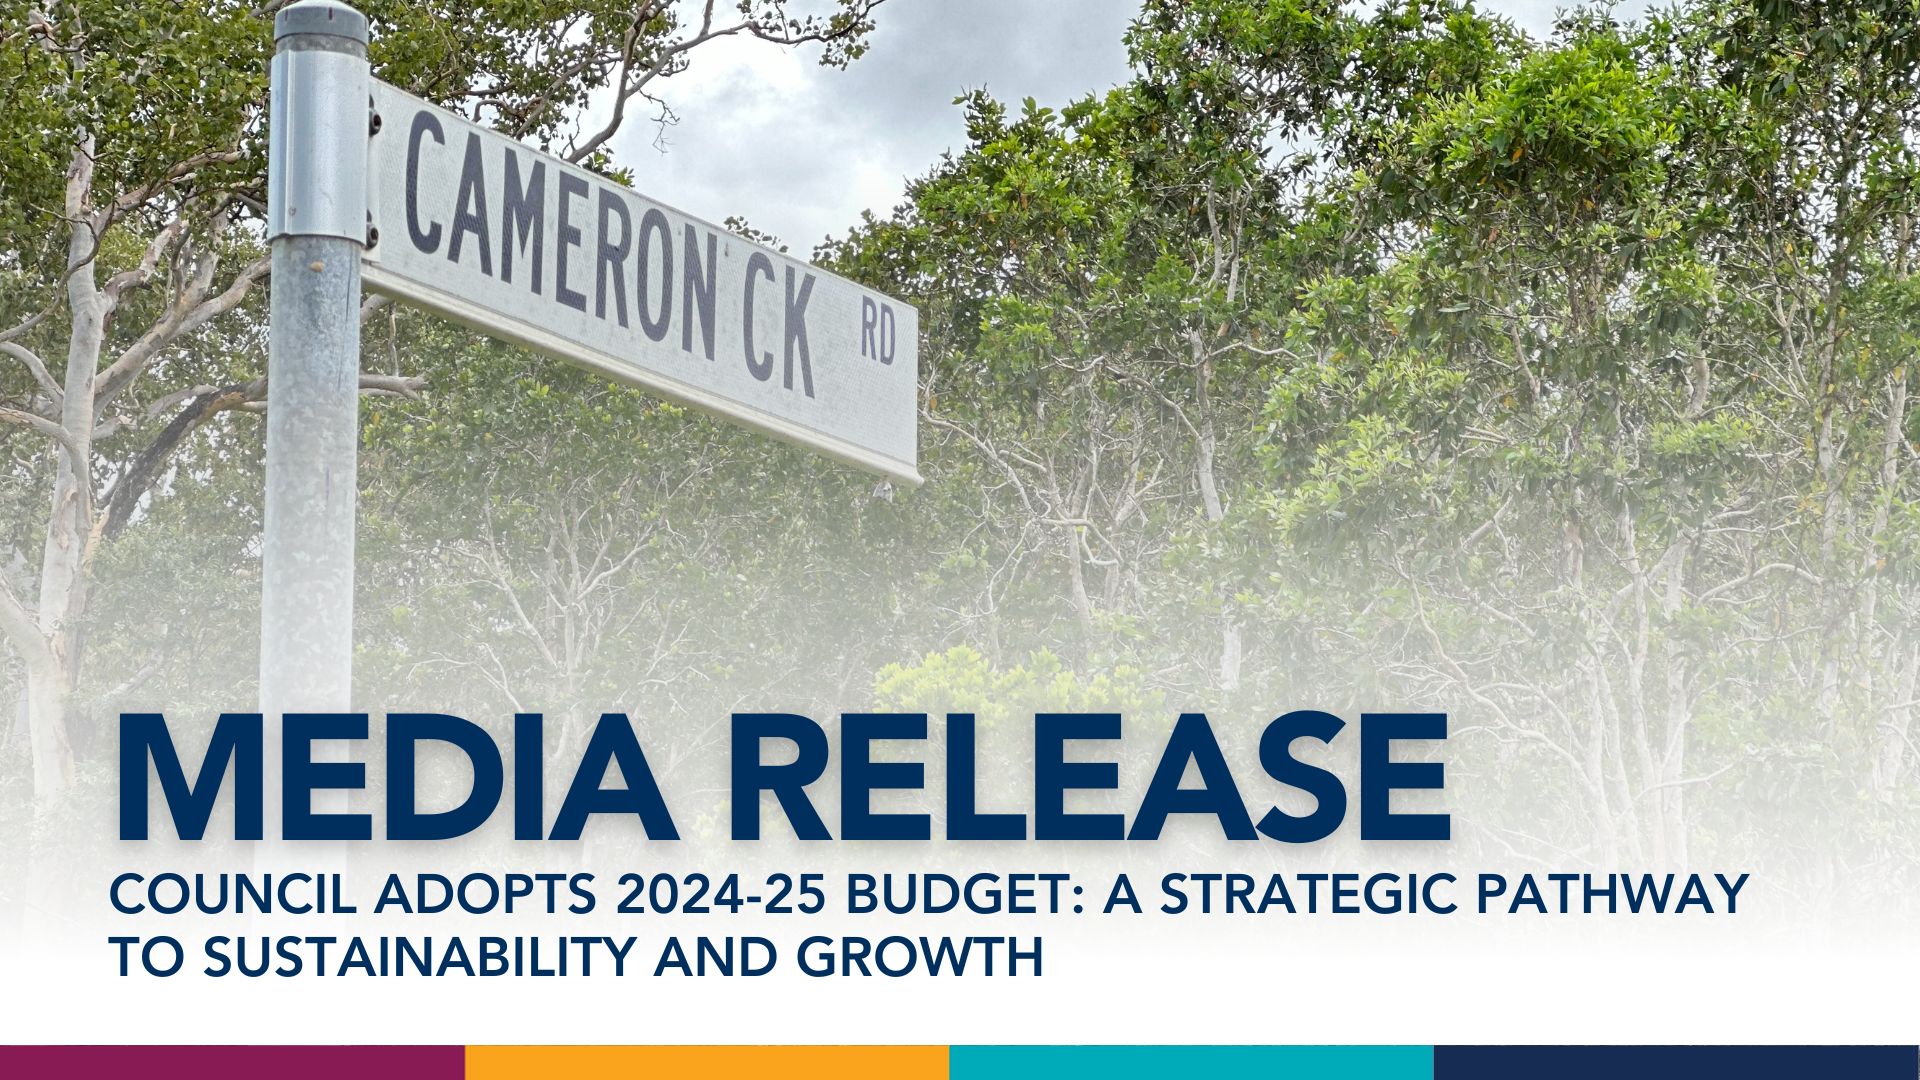 Council Adopts 2024-25 Budget: A Strategic Pathway to Sustainability and Growth